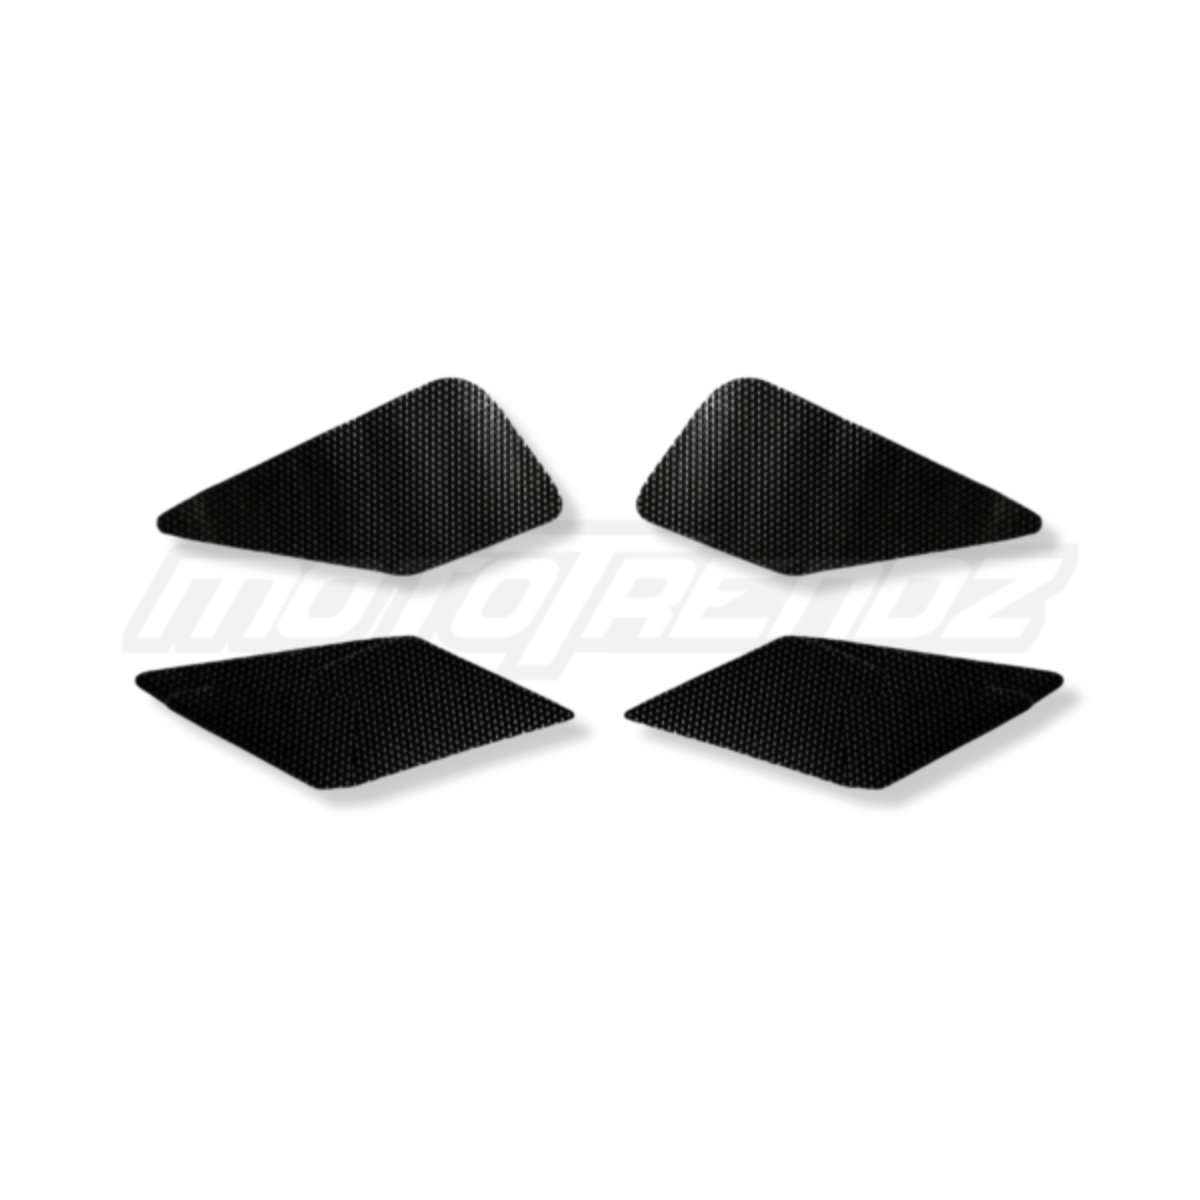 Traction Pads for Bajaj Pulsar NS/AS 200 2